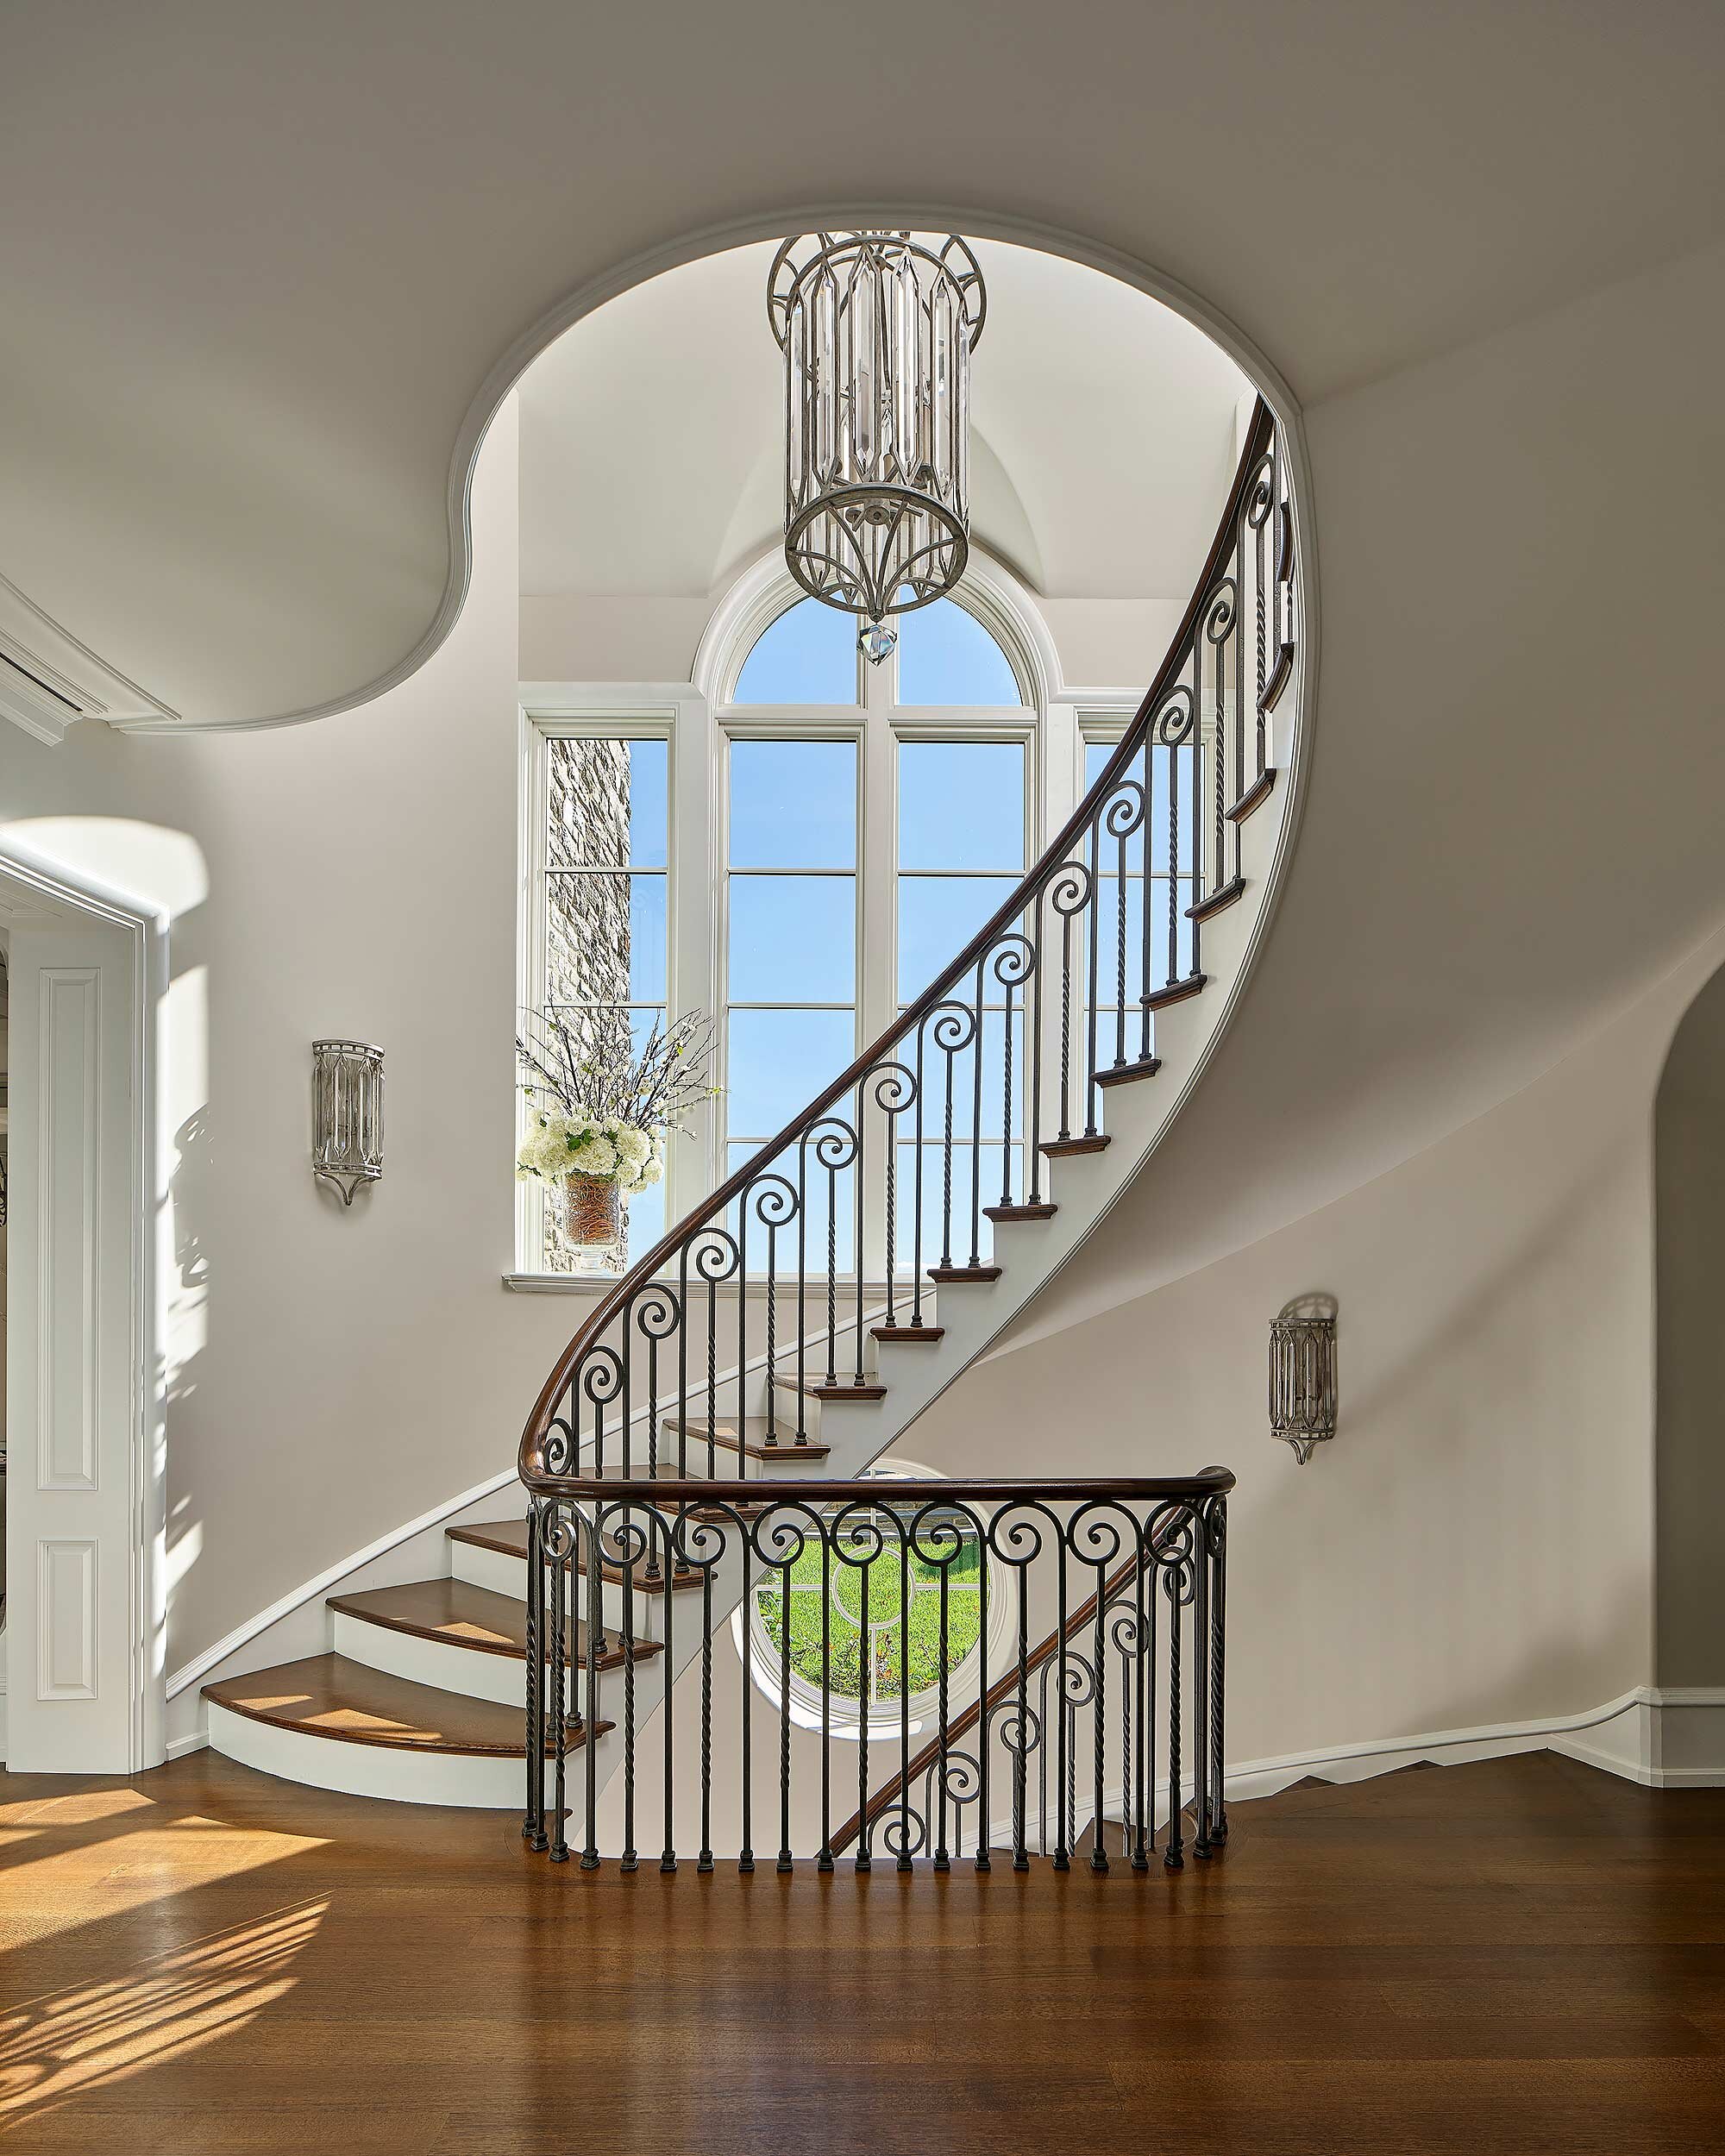  Private Residence Villanova, PA Hank Page Design See More in  Residential  